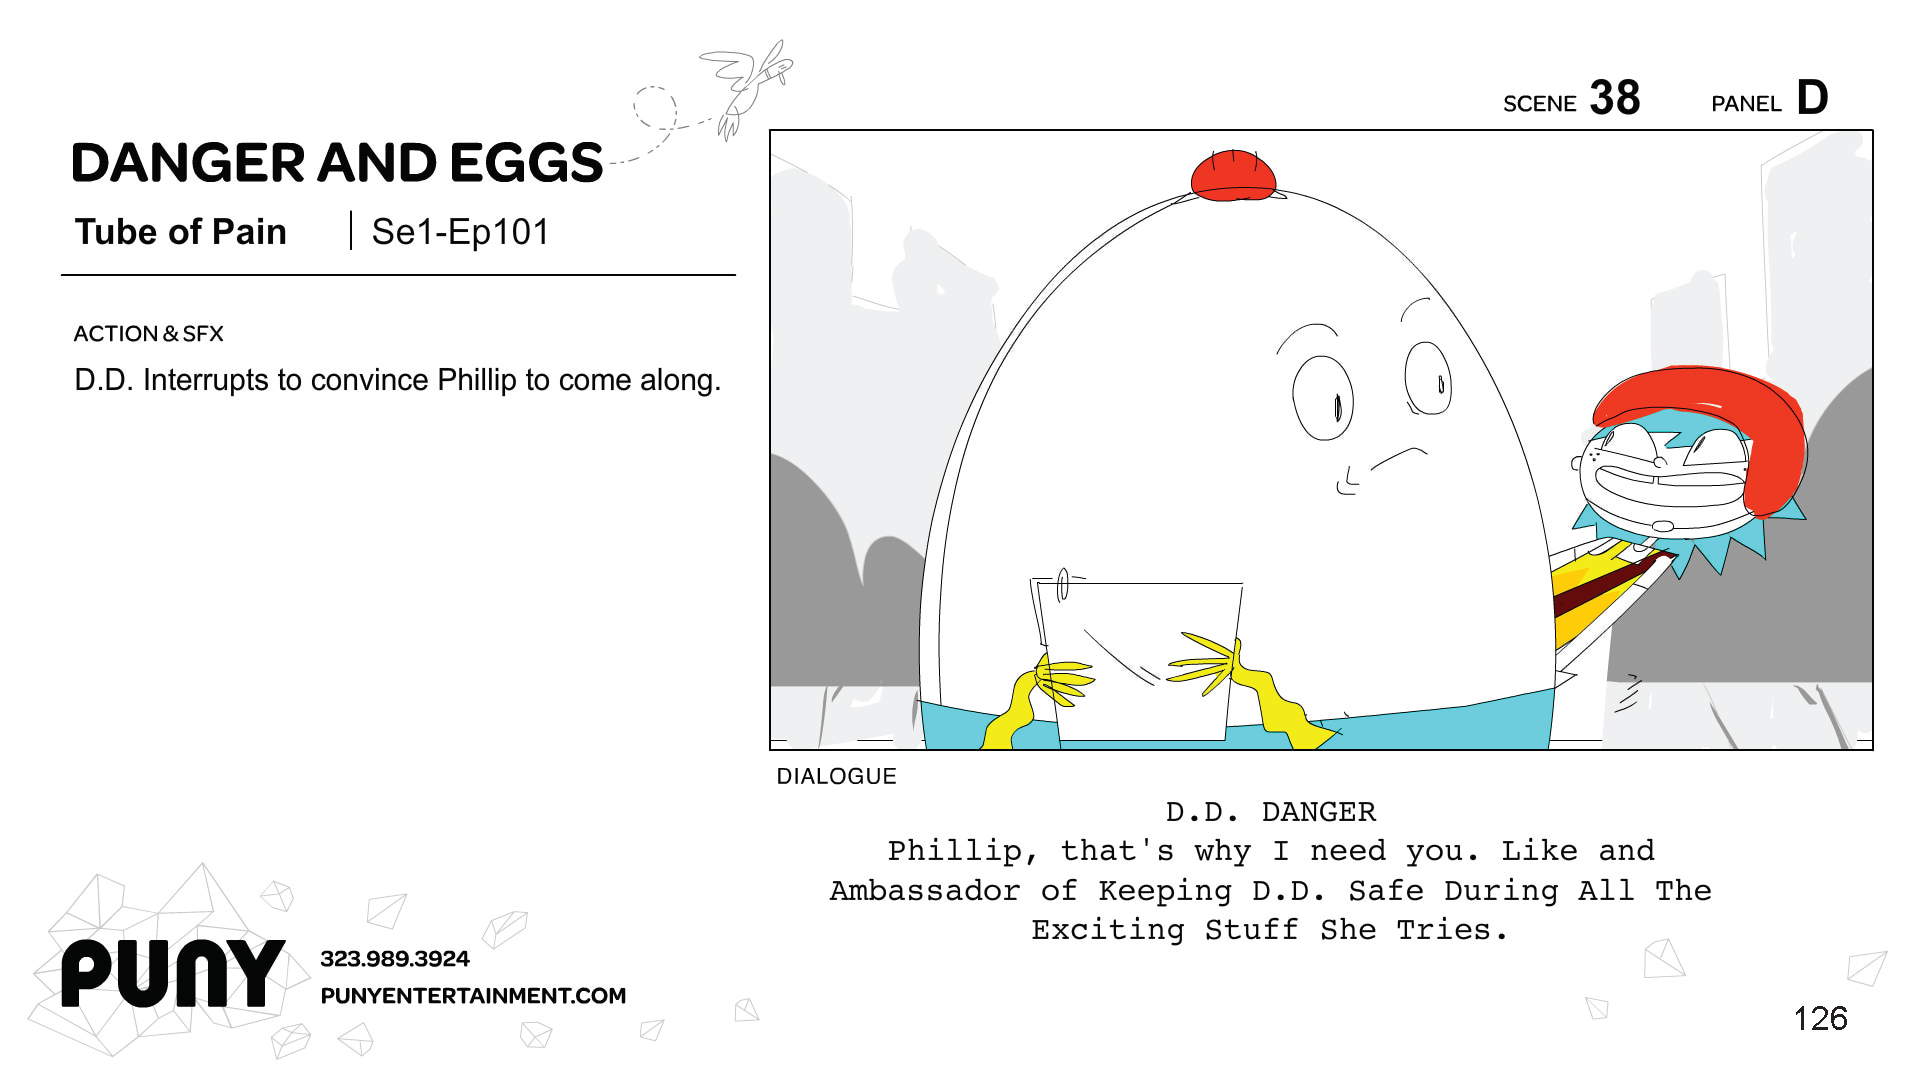 MikeOwens_STORYBOARDS_DangerAndEggs_Page_126.png